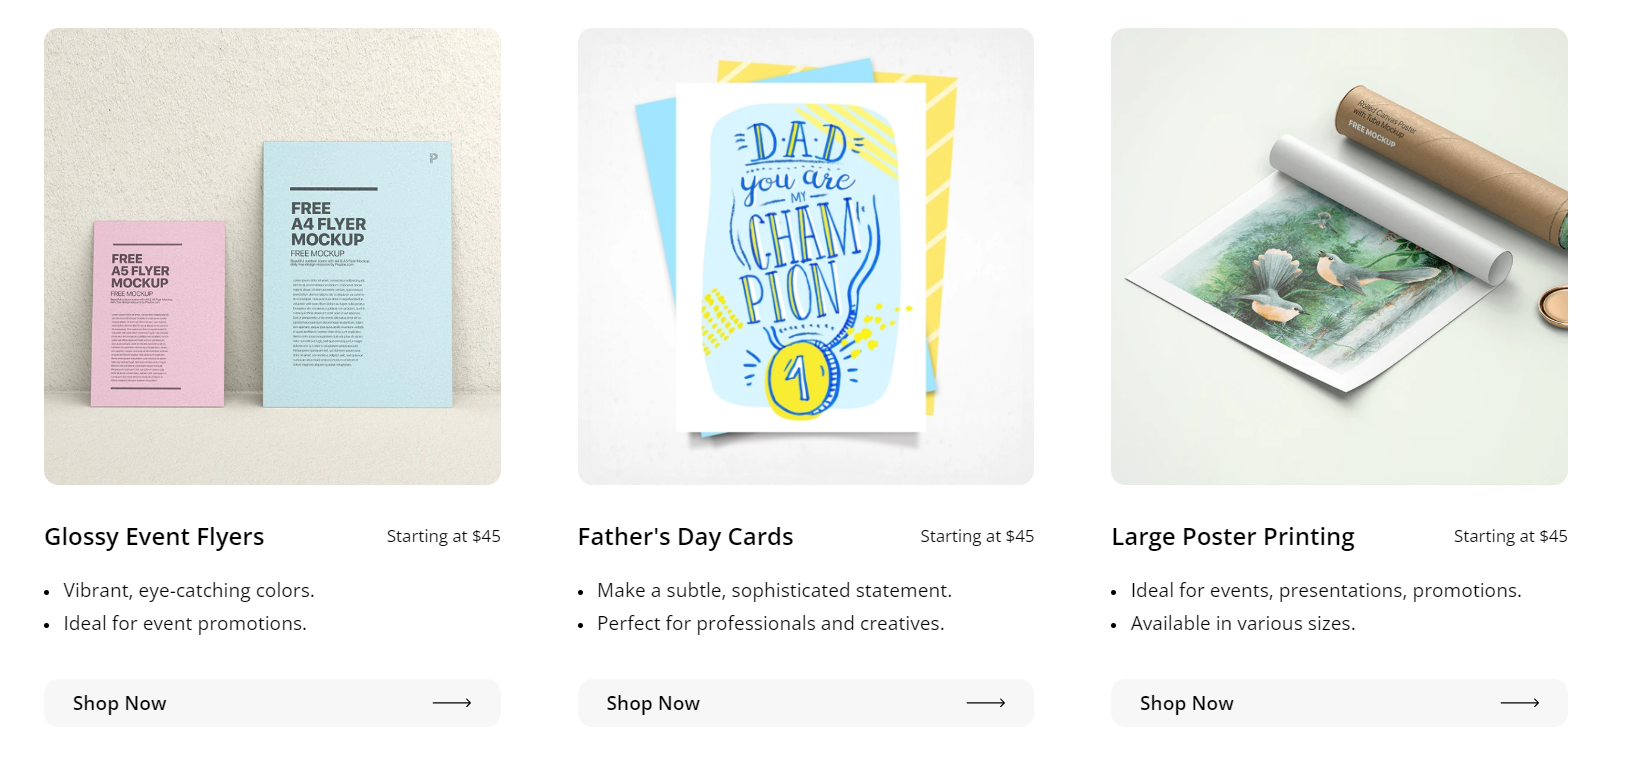 Punny Father's Day Cards